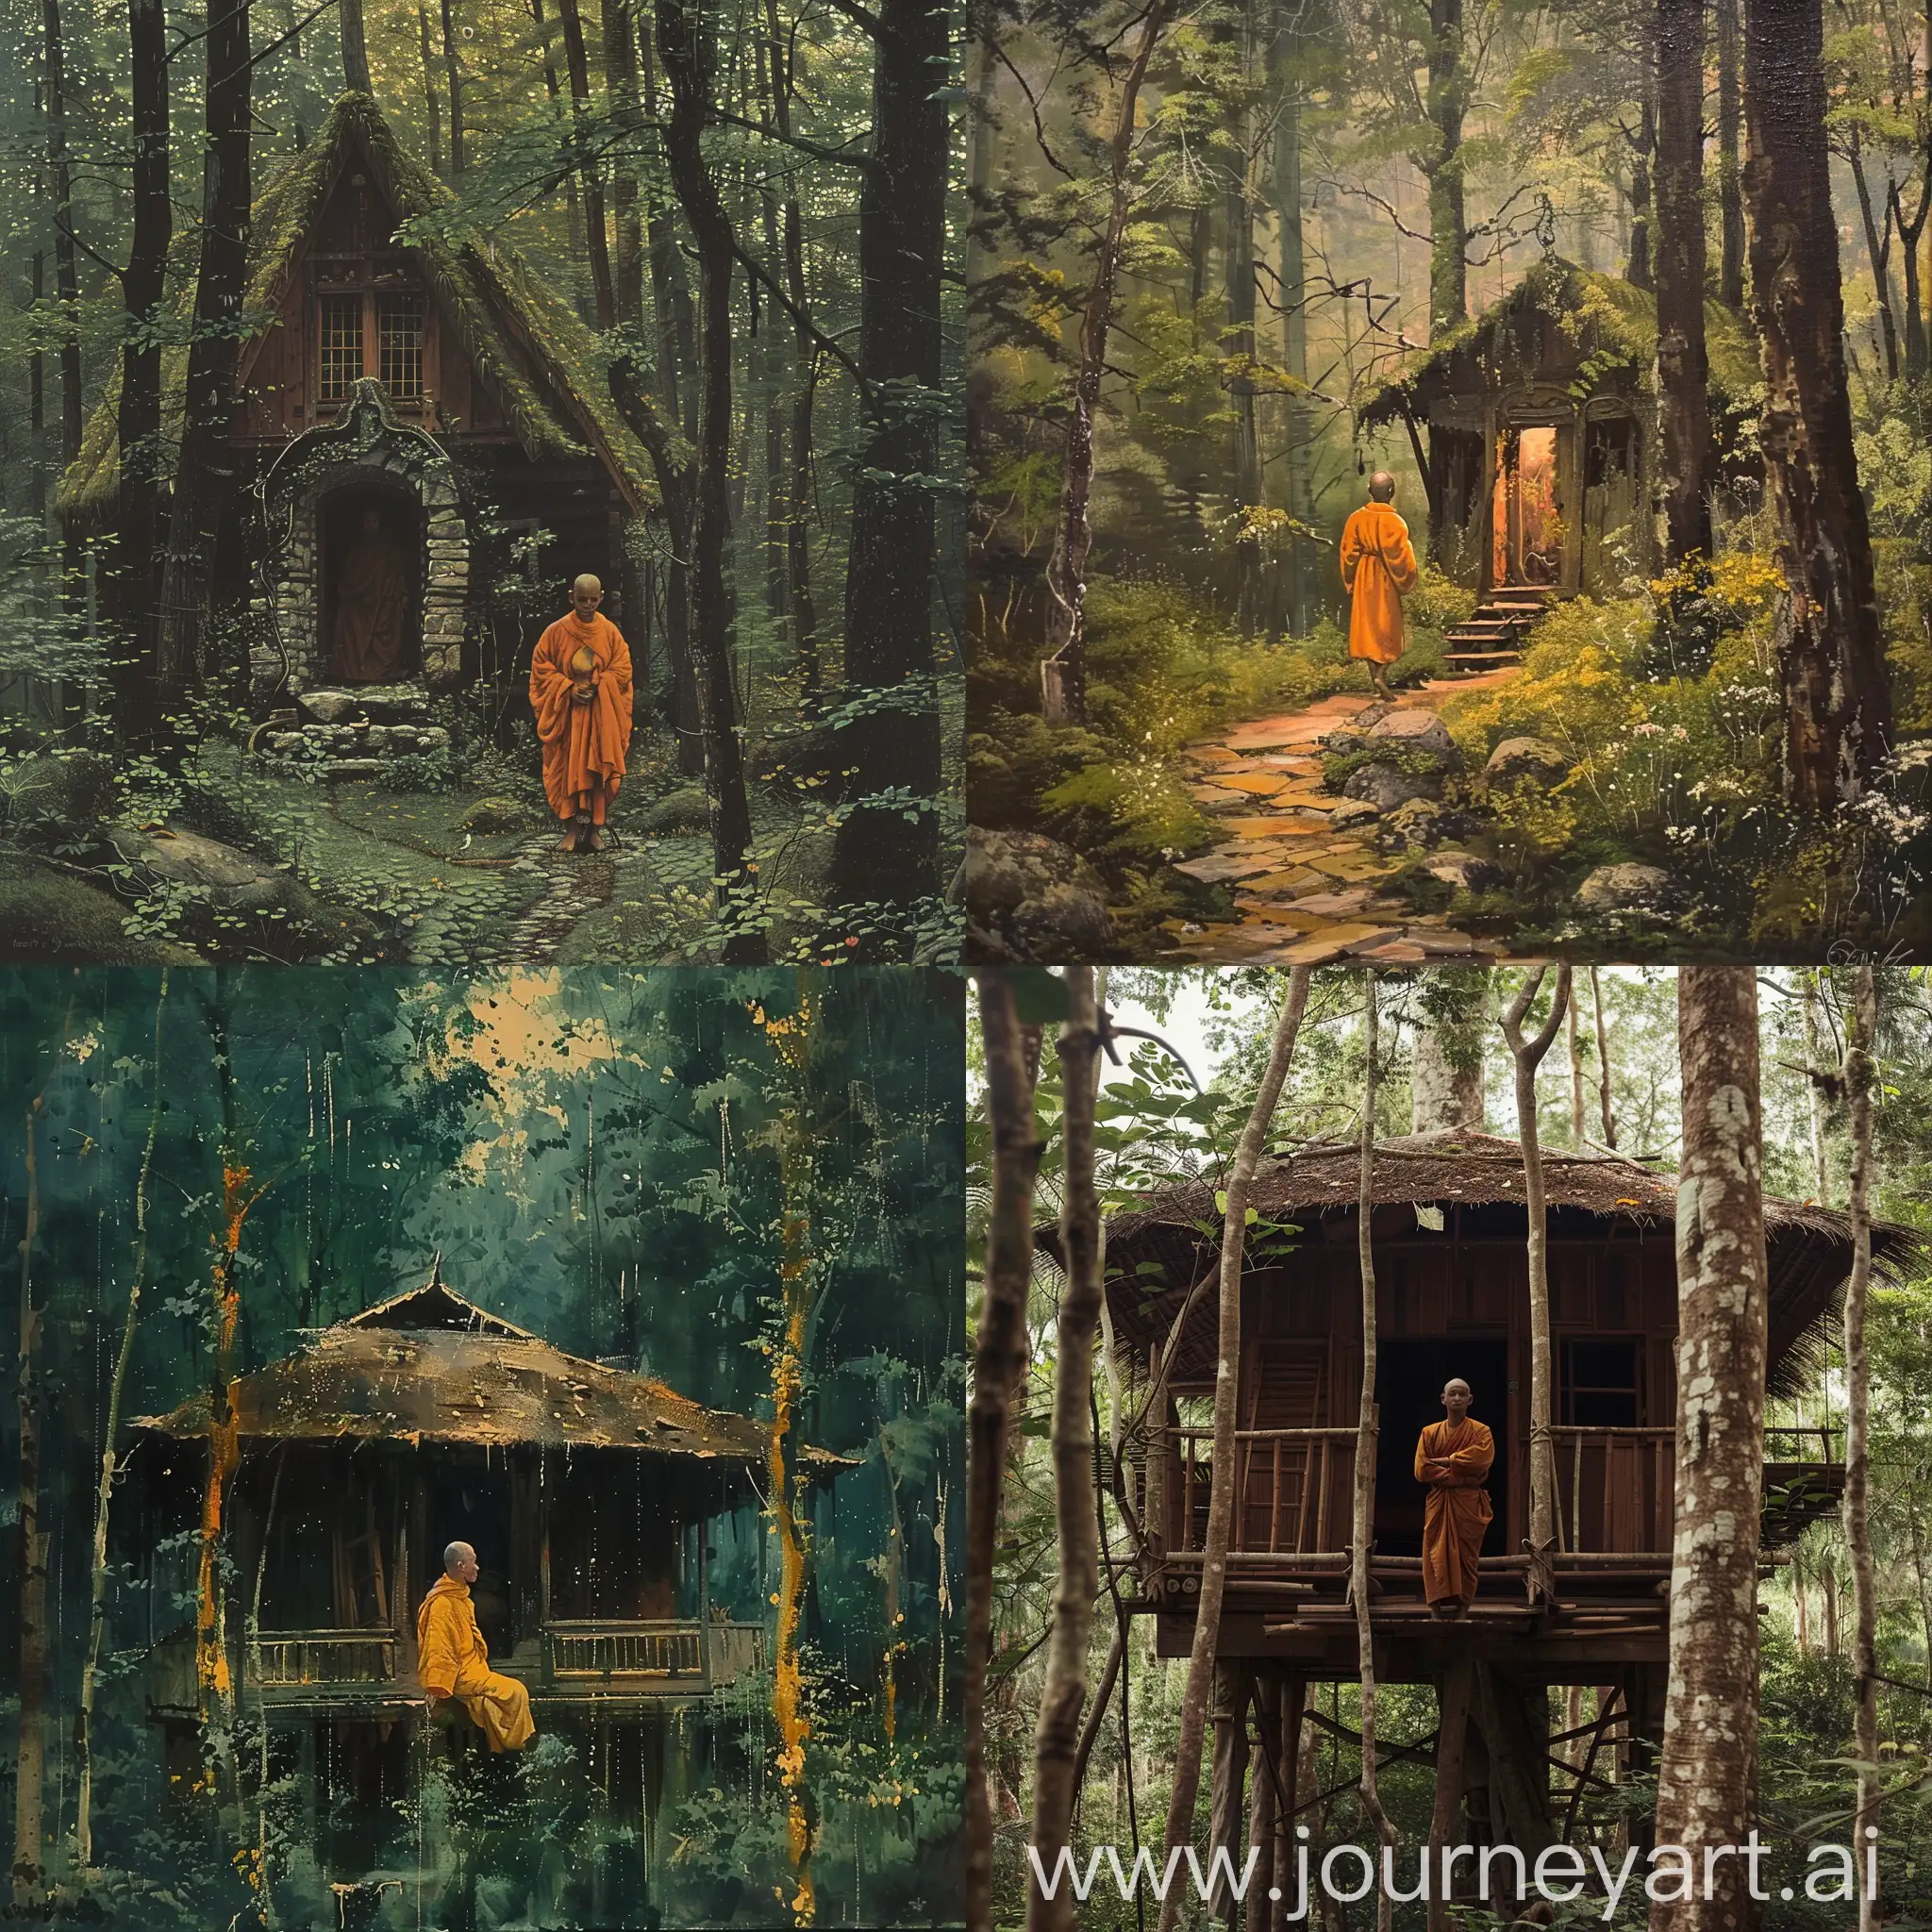 Monk in forest house